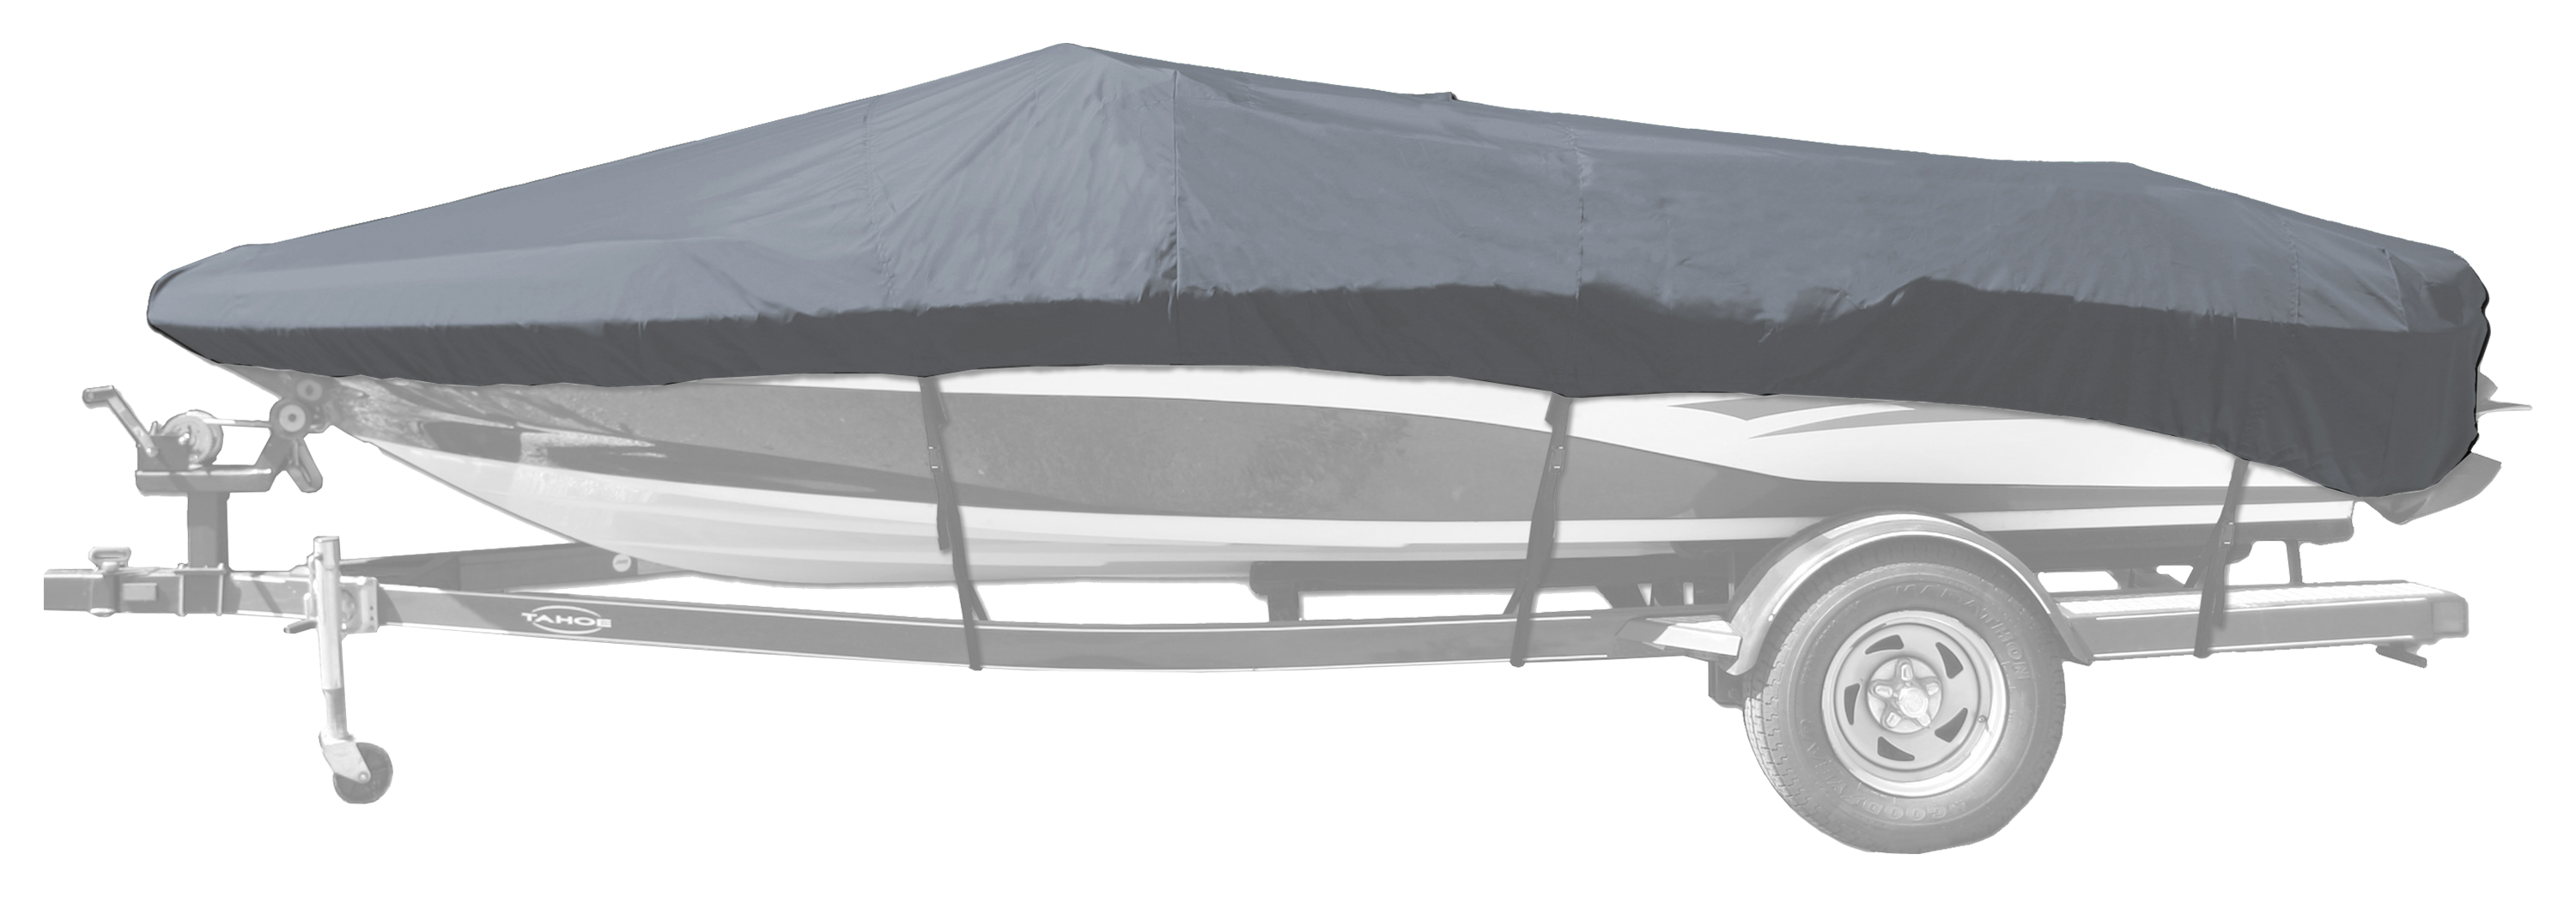 Bass Pro Shops Select Fit Hurricane Boat Cover by Westland for Euro V-Hull Runabout I/O Model - Gray - 21'6'' to 22'5